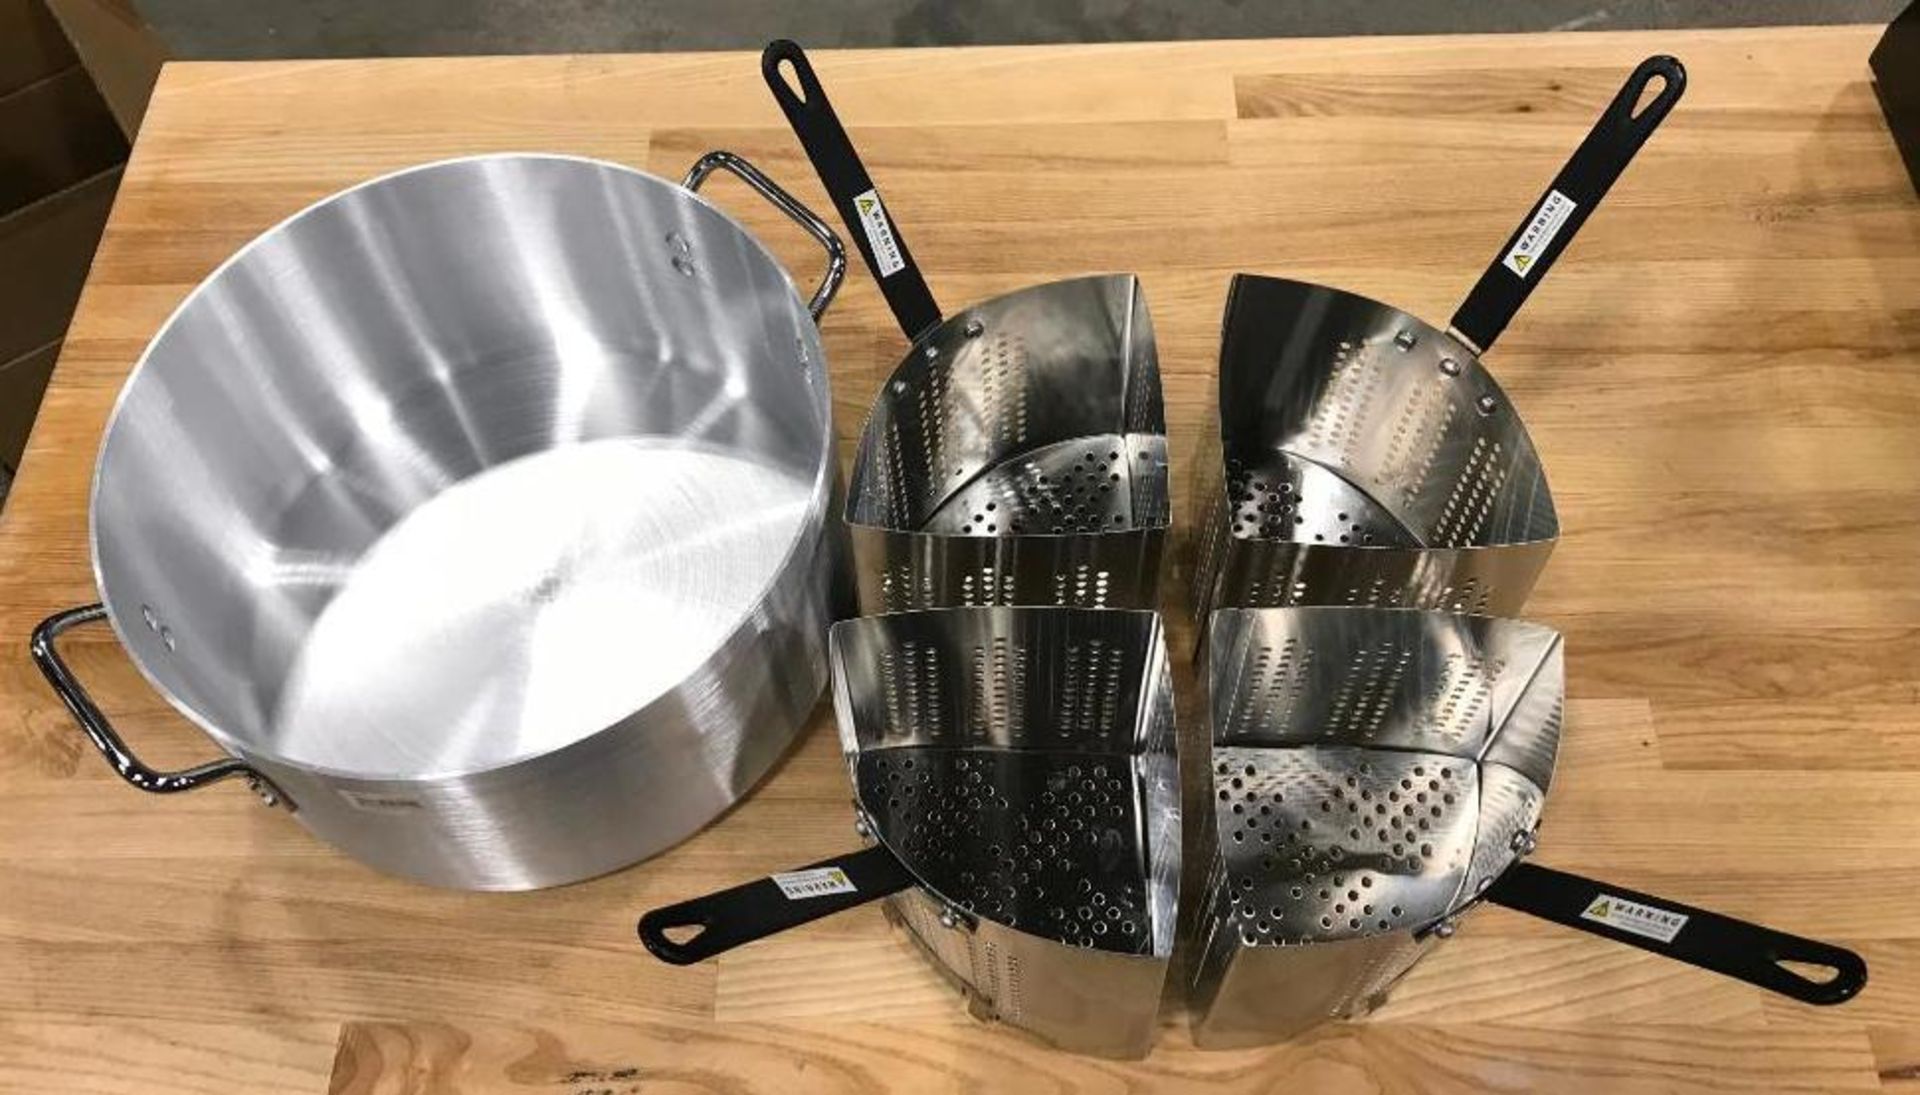 ALUMINUM PASTA COOKER SET, 4 SEPARATE STAINLESS COOKING COMPARTMENTS - Image 4 of 4